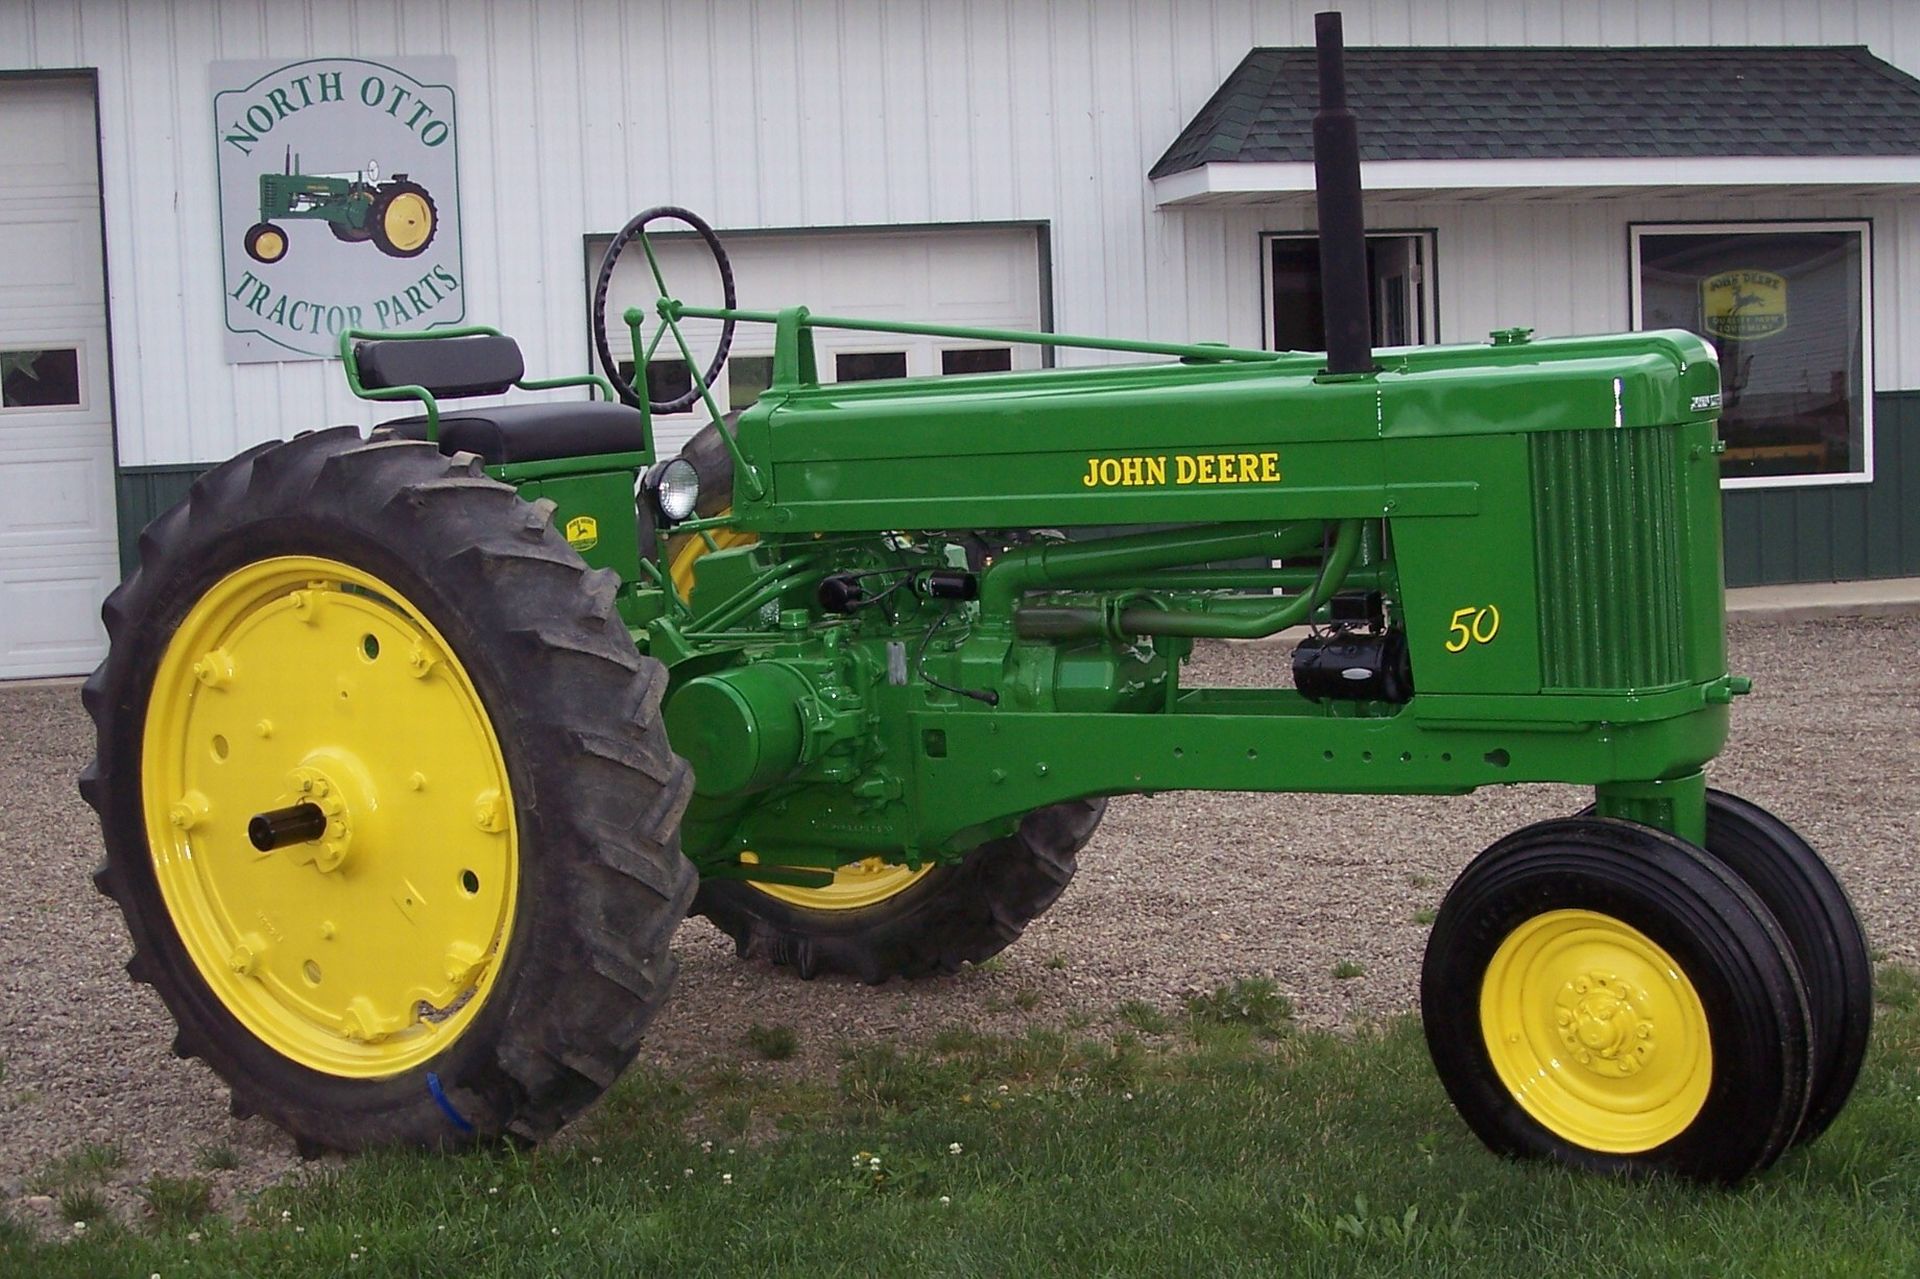 john deere tractor wallpaper,land vehicle,tractor,vehicle,agricultural machinery,car